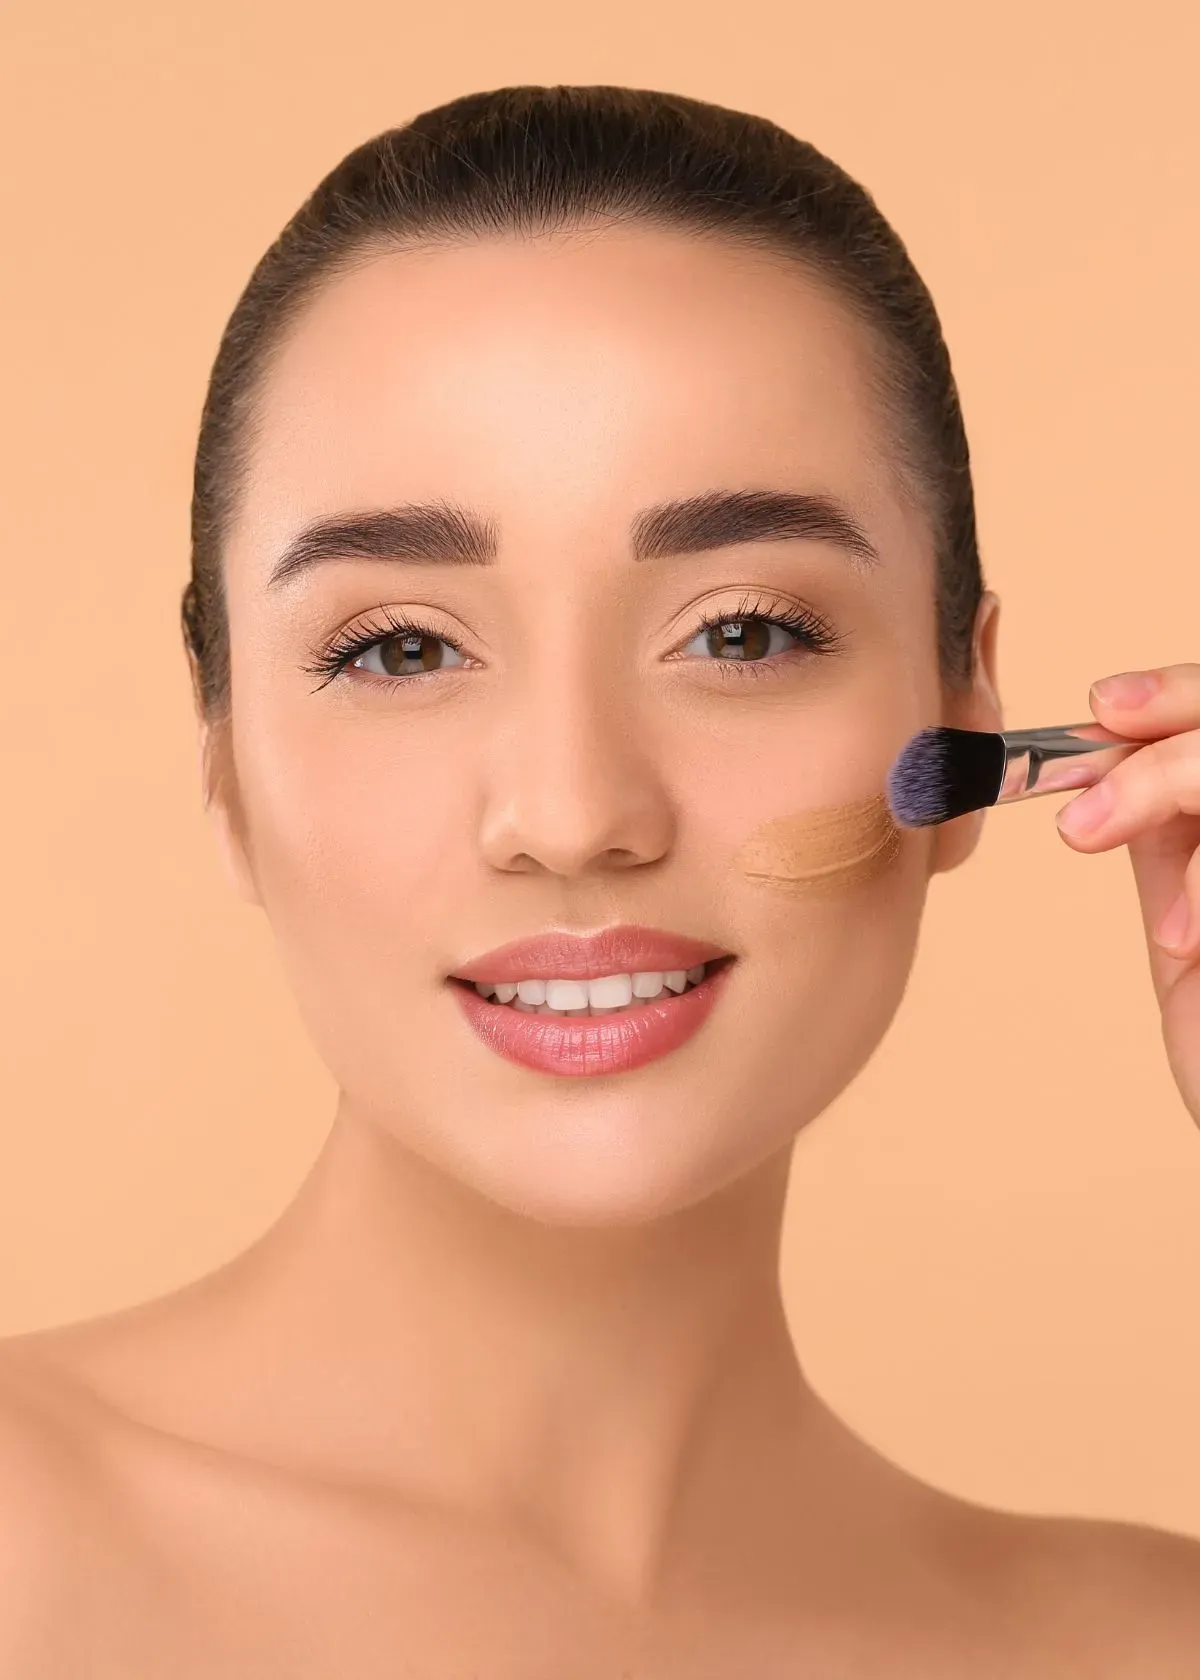 How to Apply Full Coverage Foundation